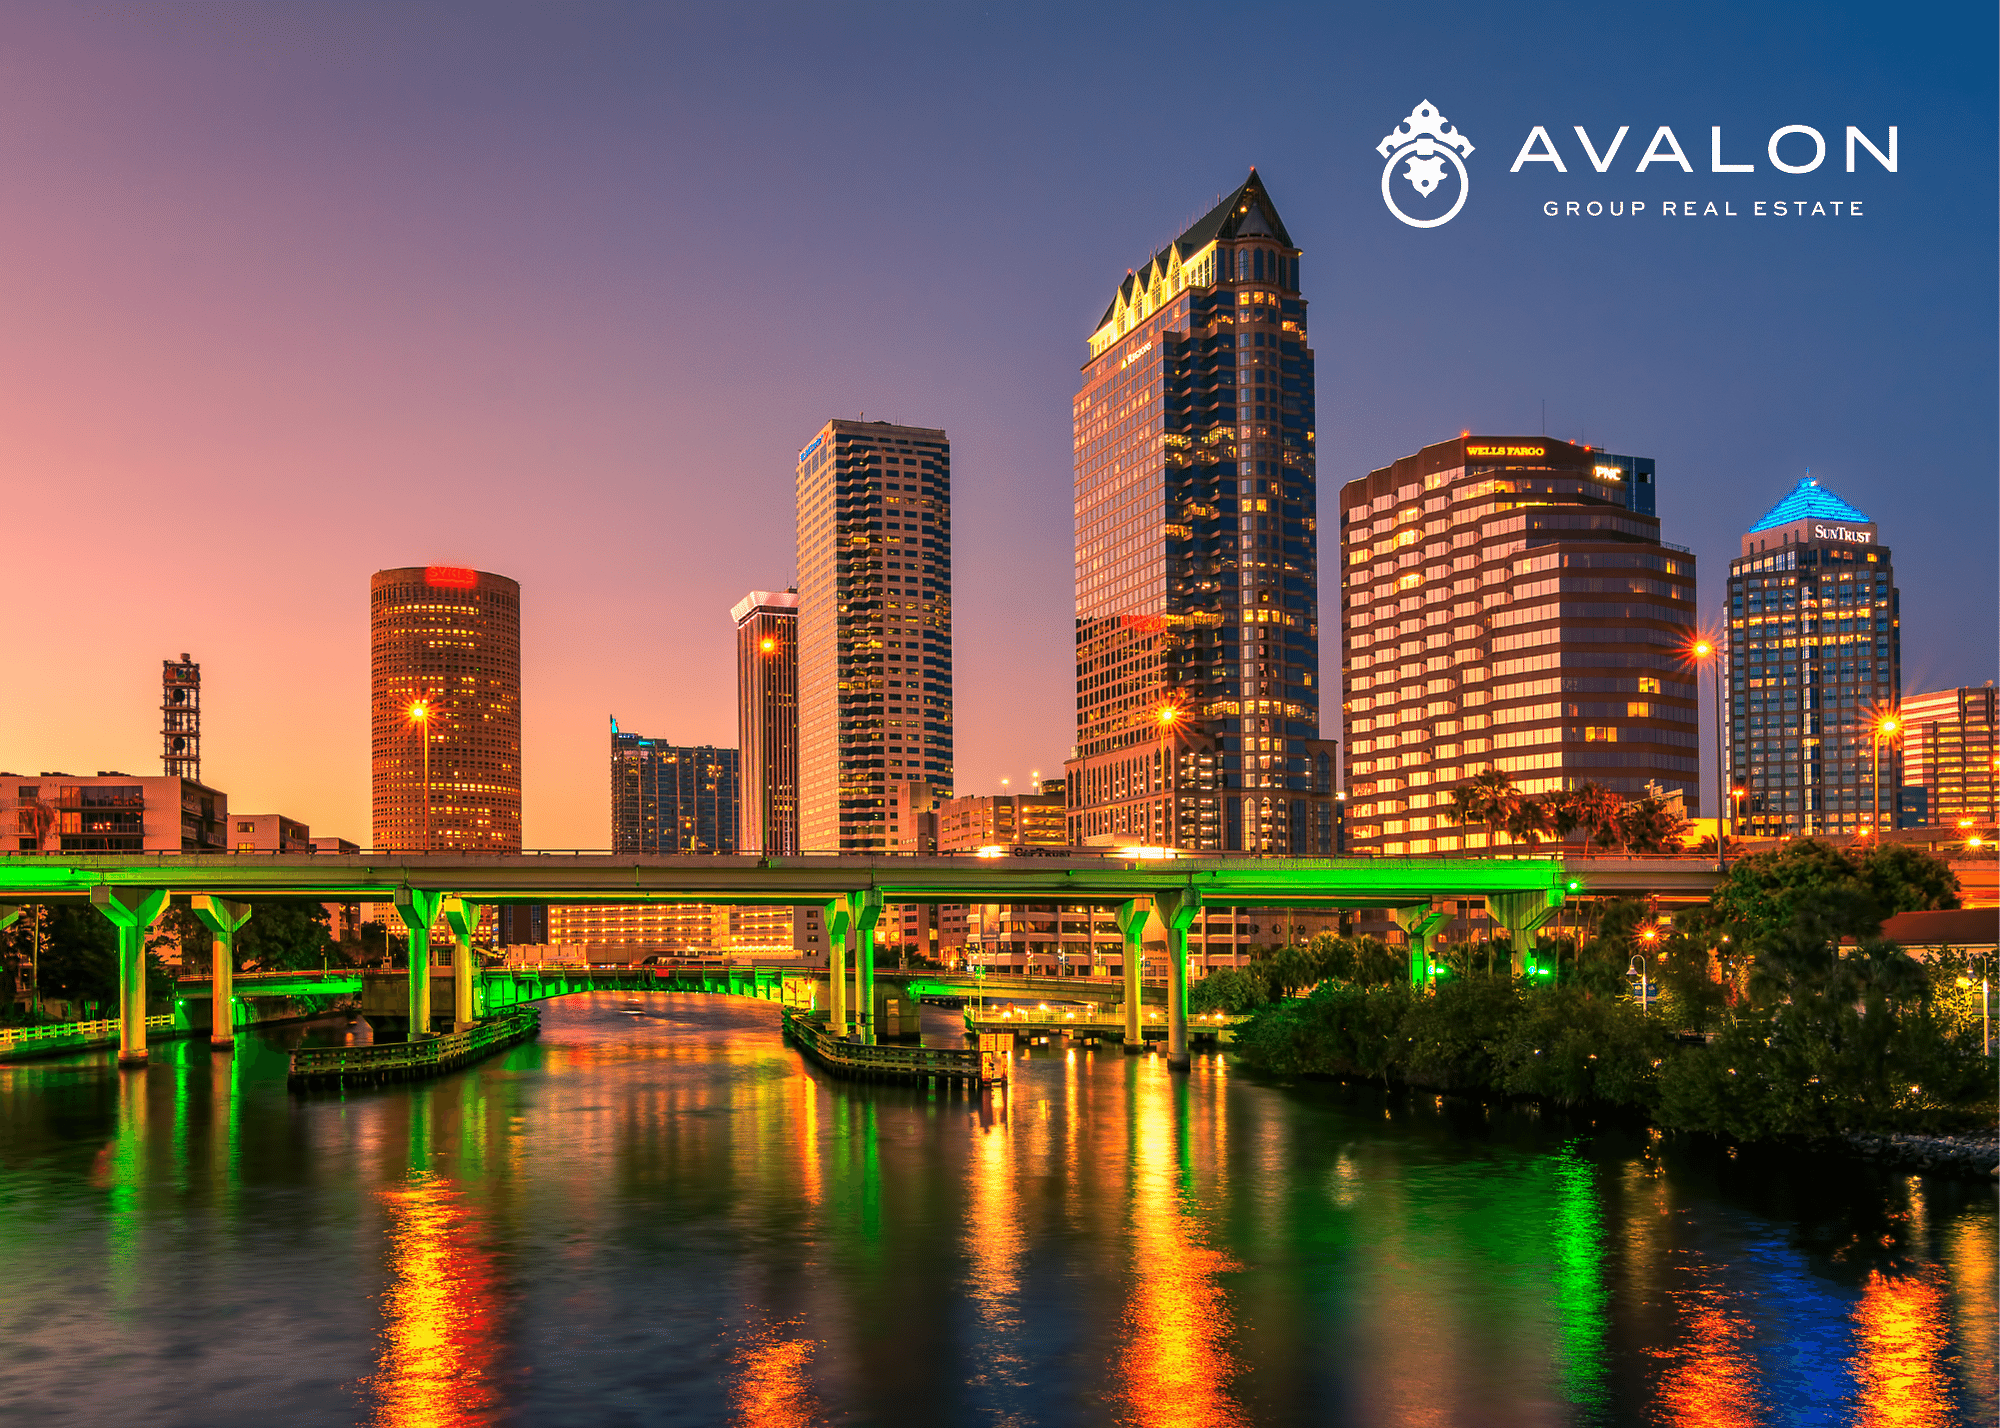 Additionally, this picture shows 6 high rise buildings in Downtown Tampa. Furthermore, the buildings have an orange tint to them because the picture is taken at sunset. There is a bridge in front of the buildings that looks green from the lighting being projected onto it.